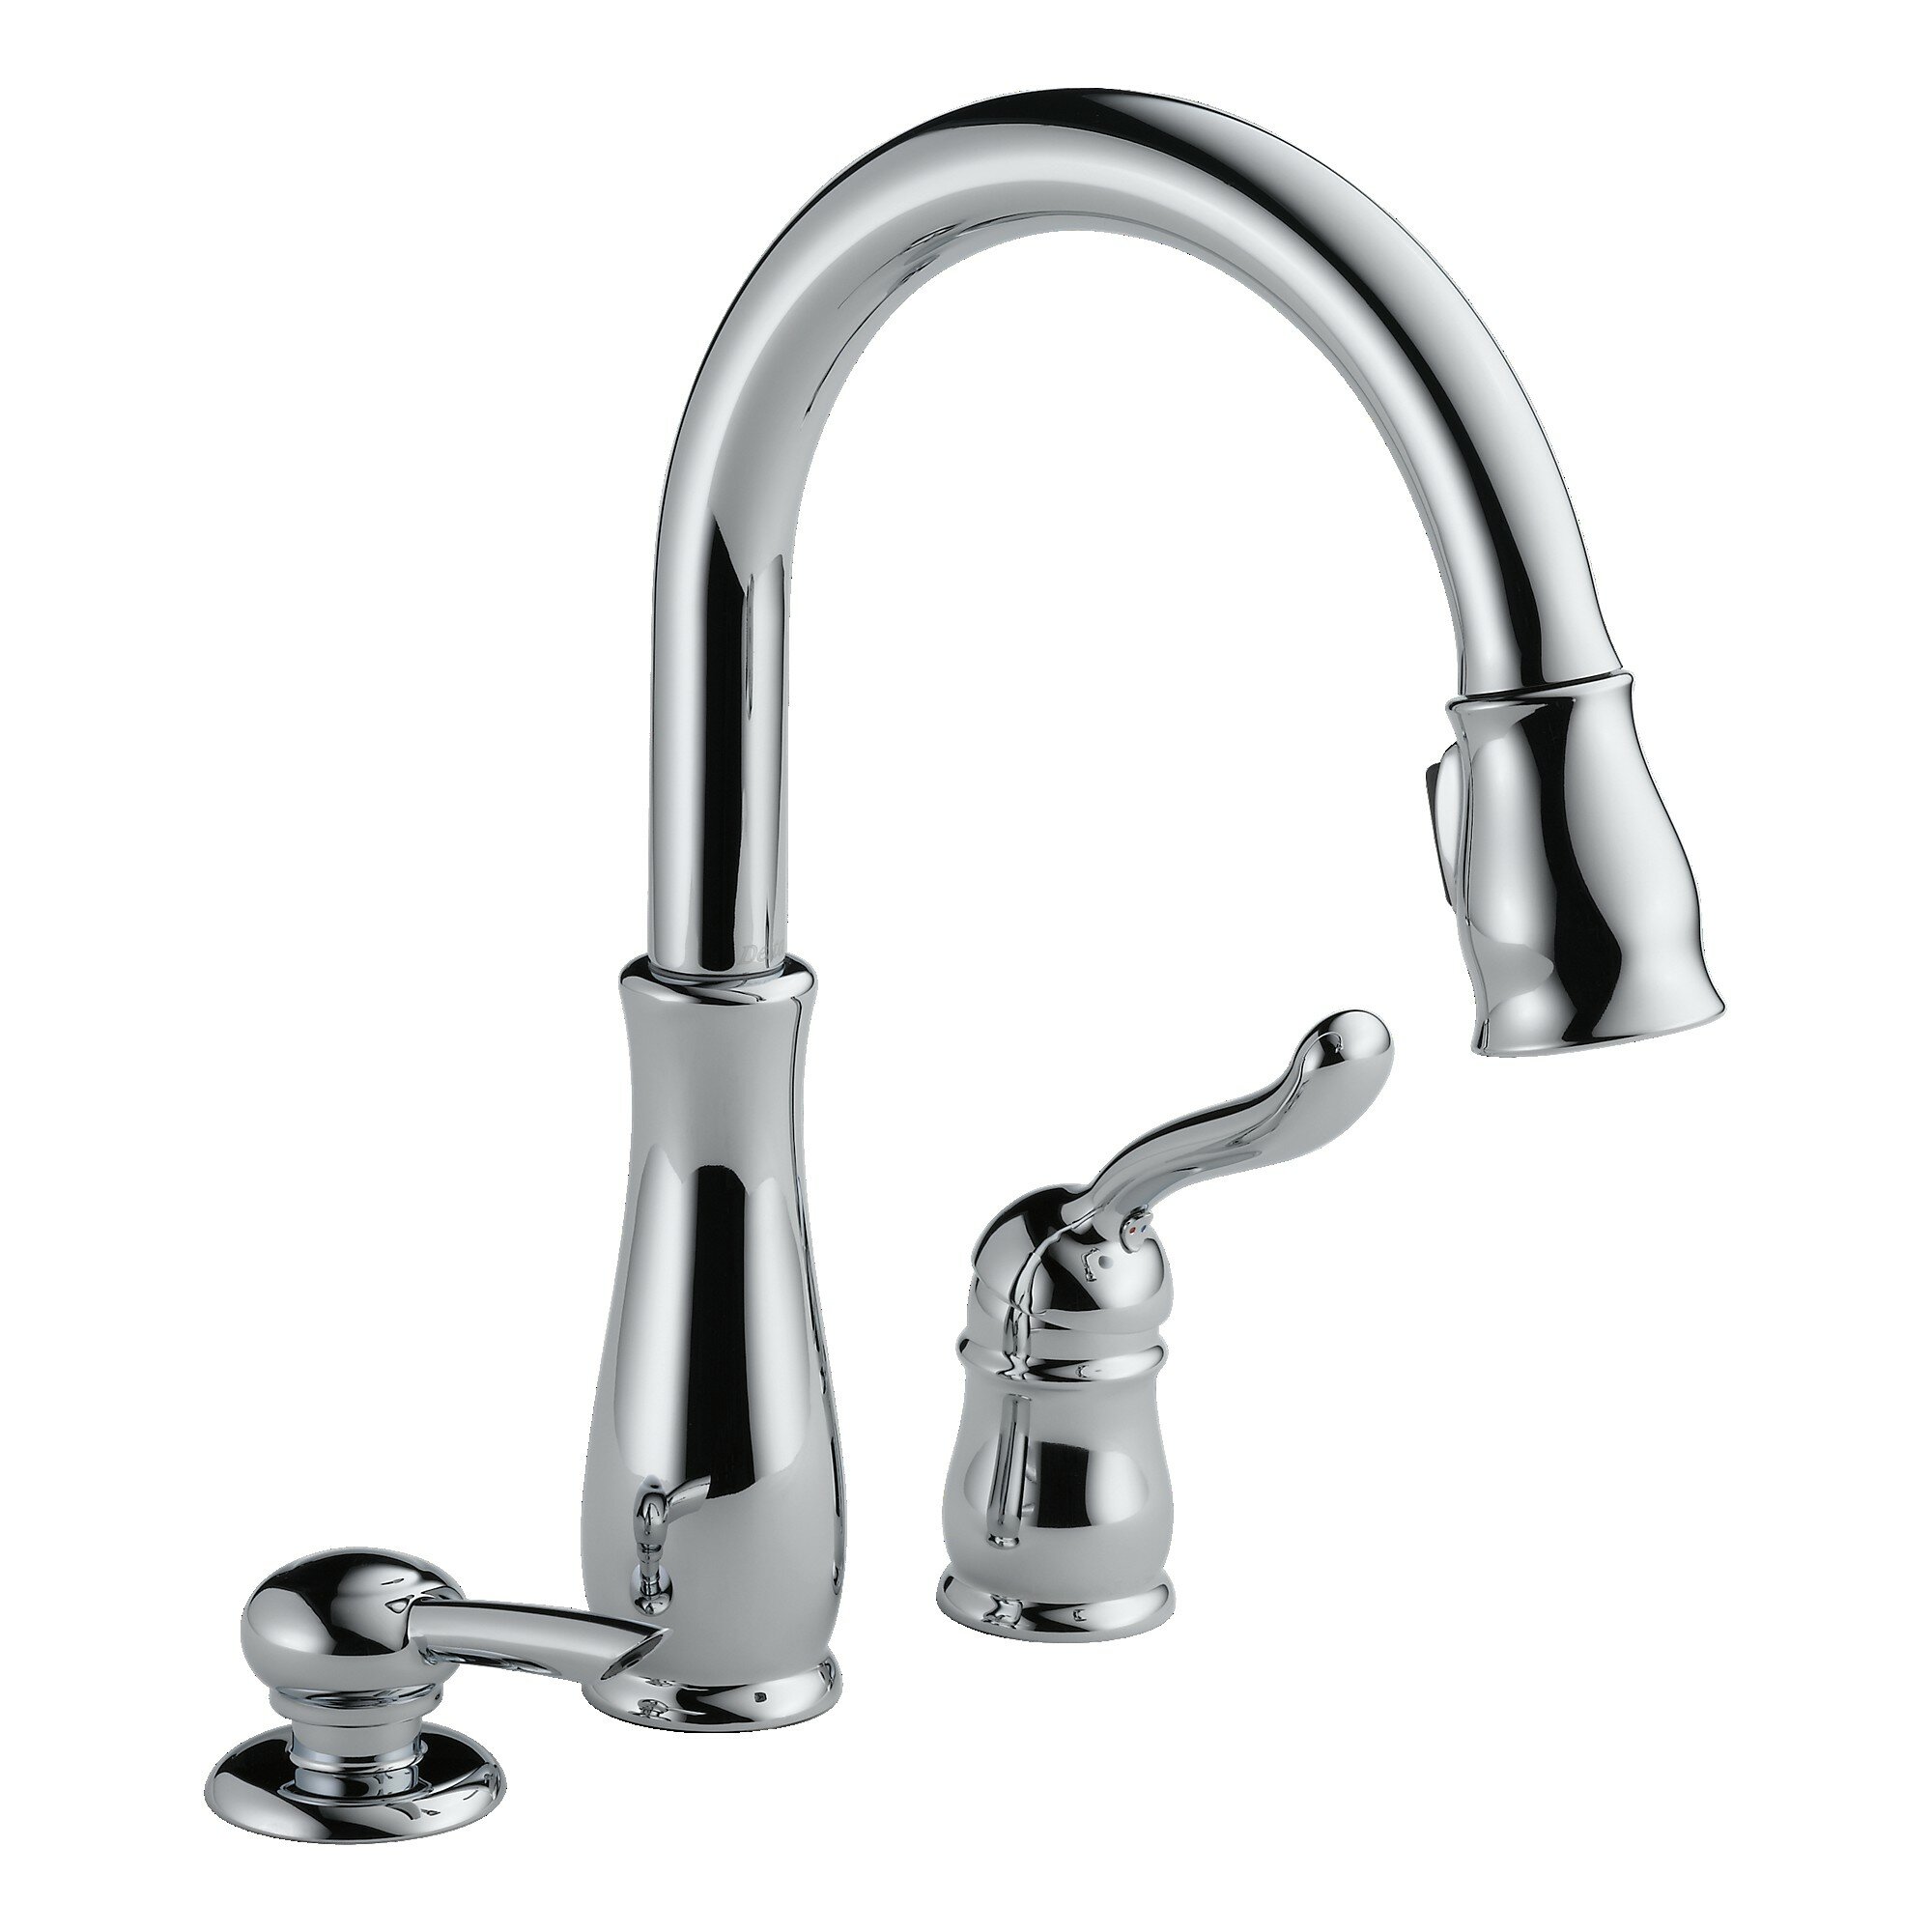 978 Sd Dst Delta Lel Pull Down Single Handle Kitchen Faucet With Magnatite Docking And Diamond Seal Technology Reviews Wayfair